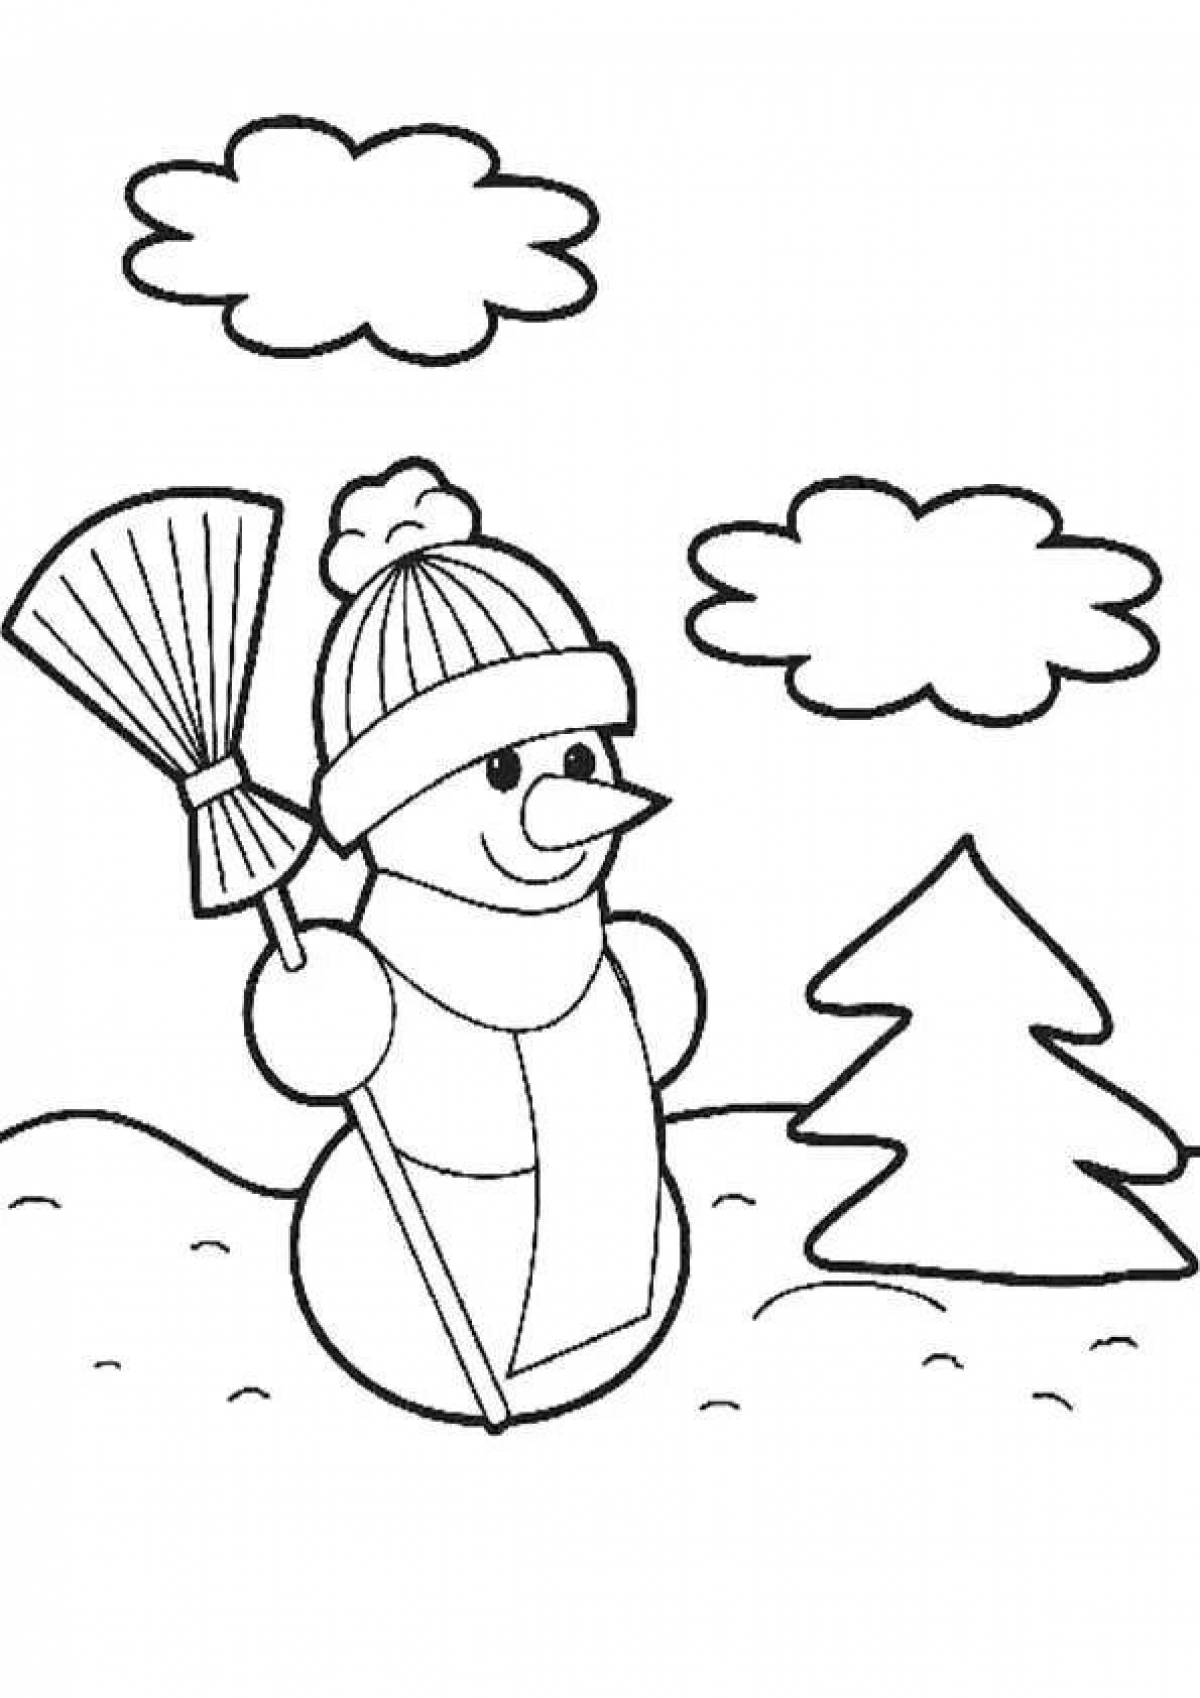 Live winter coloring book